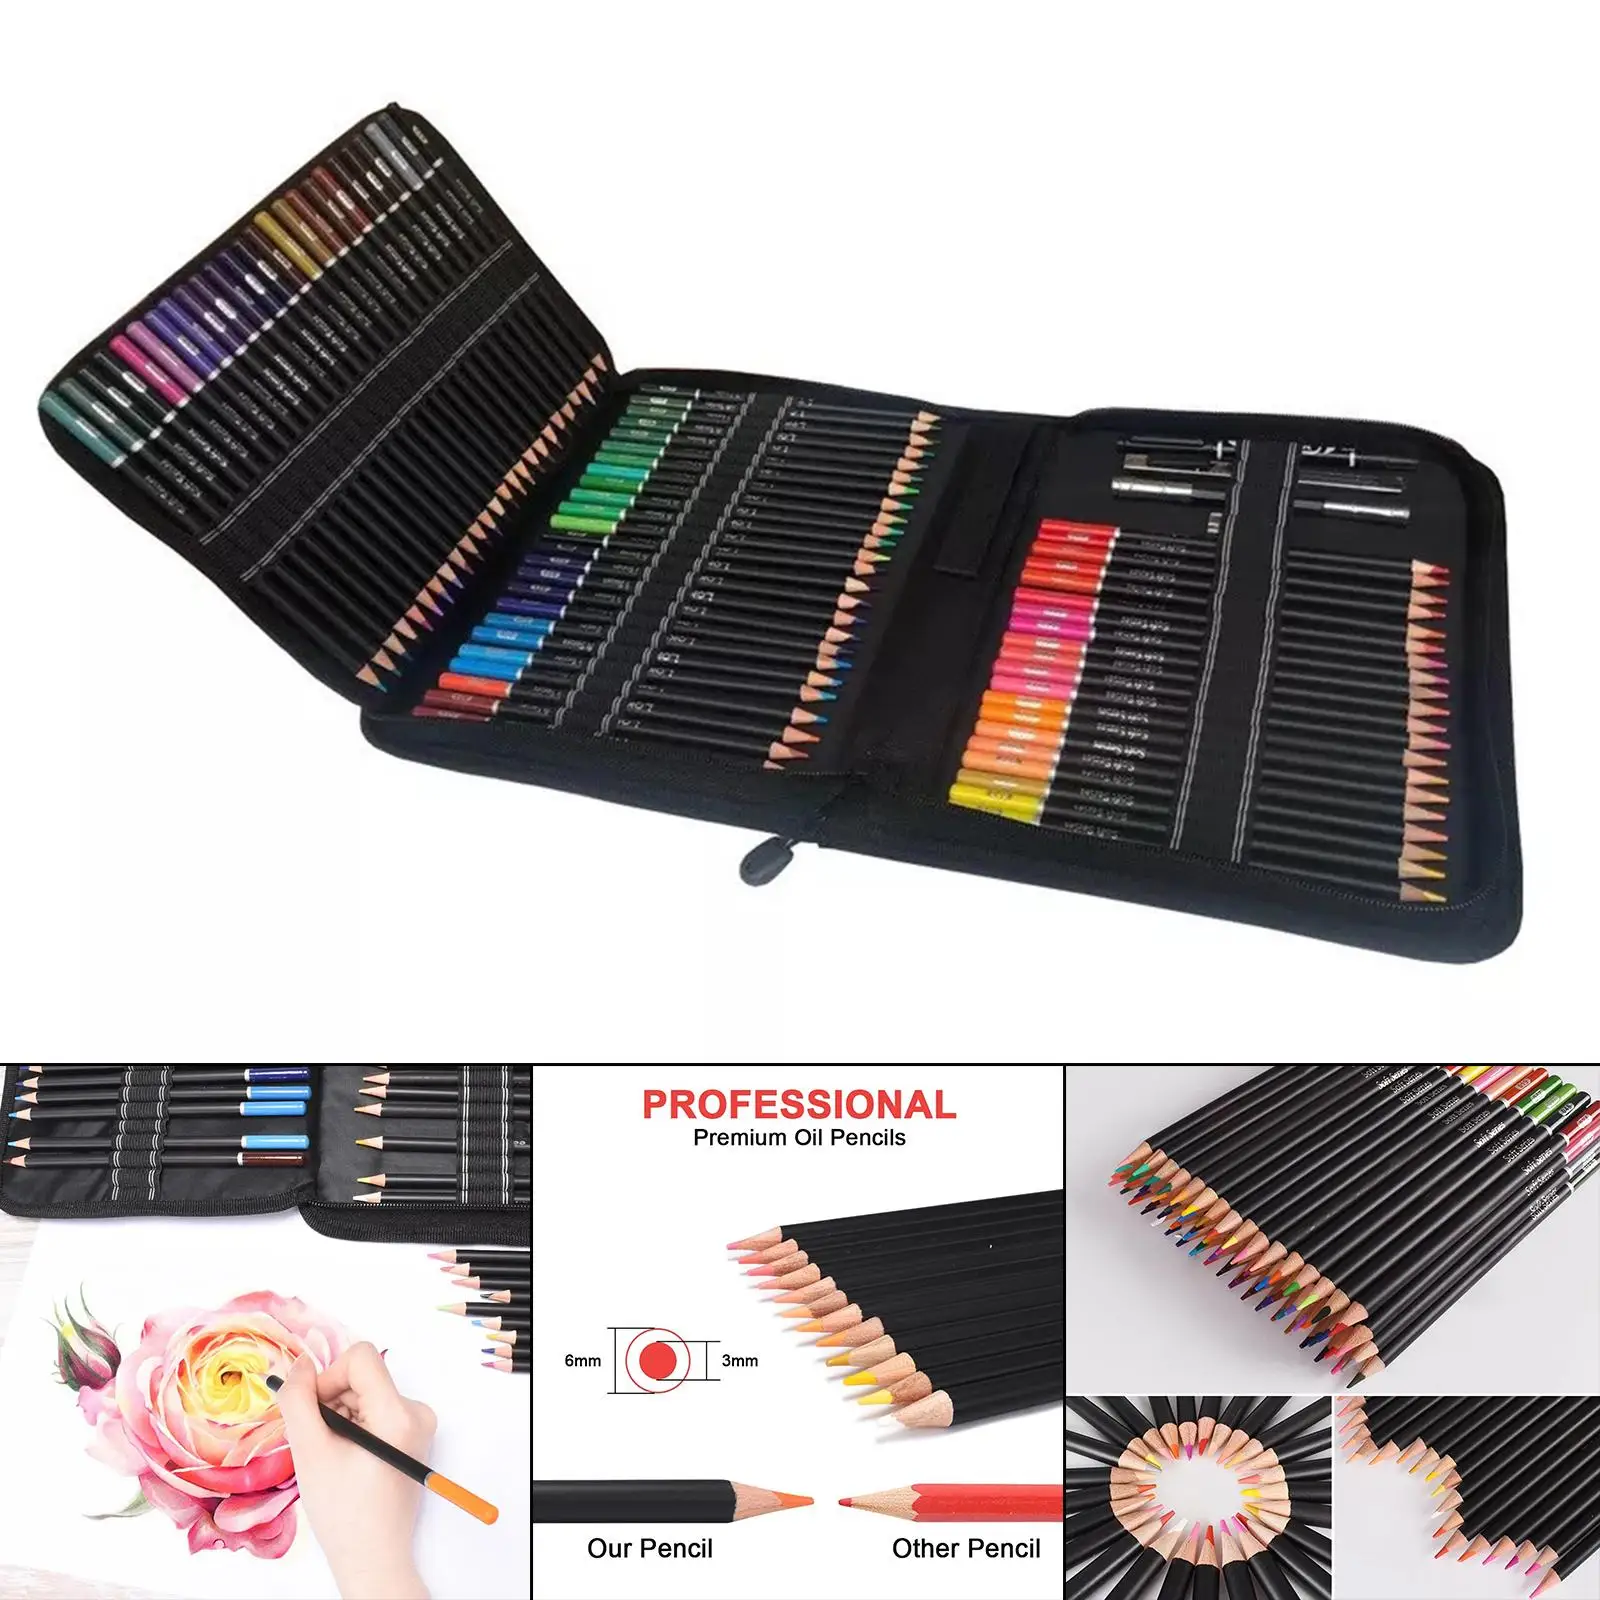 Professional 72 Oil Colored Pencils with Pencil Extender Supplies Crafting Beginner Drawing Shading Colouring